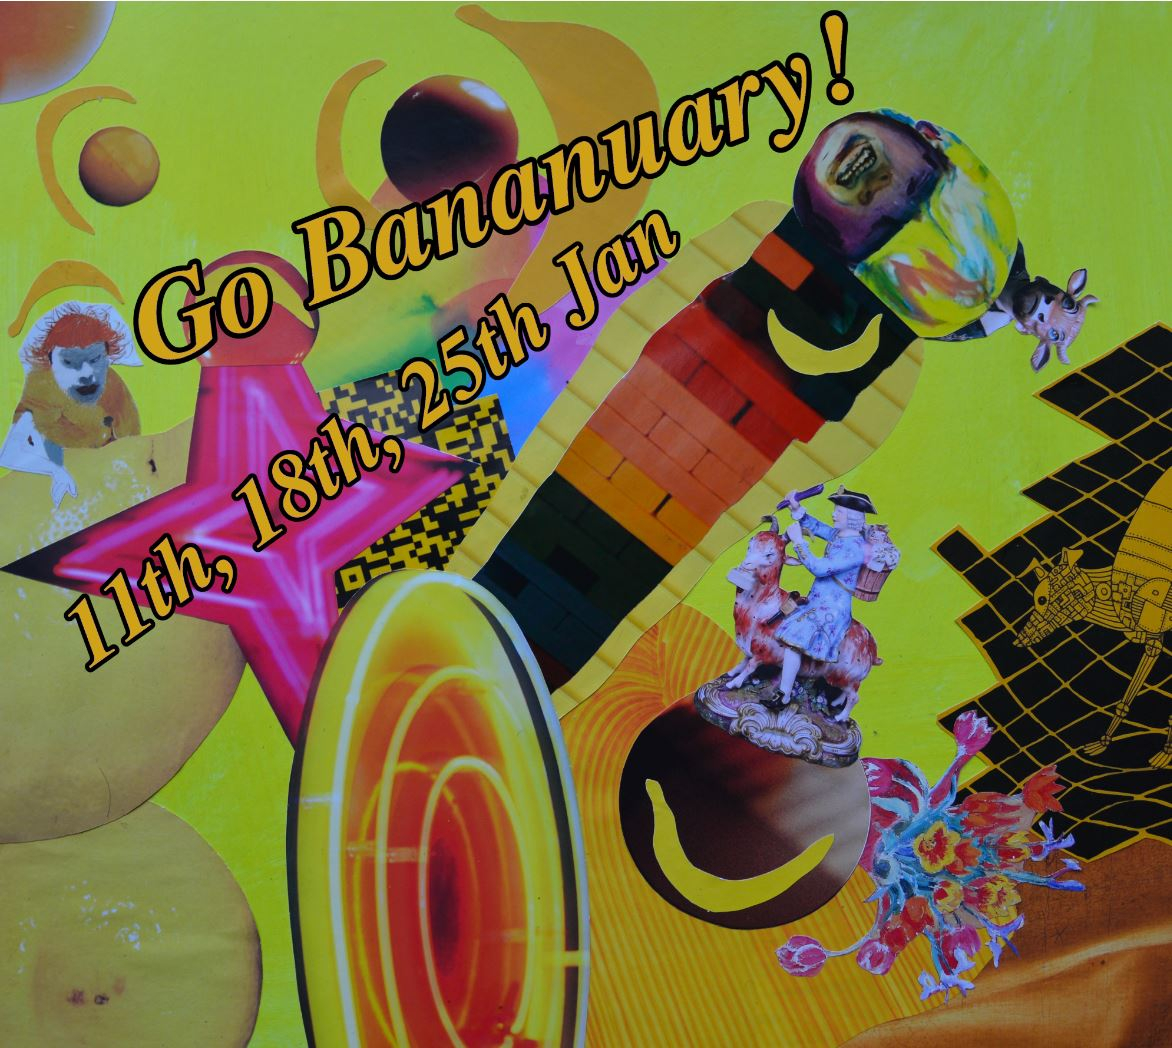 GO BANANUARY ! - A Series of 3 Events